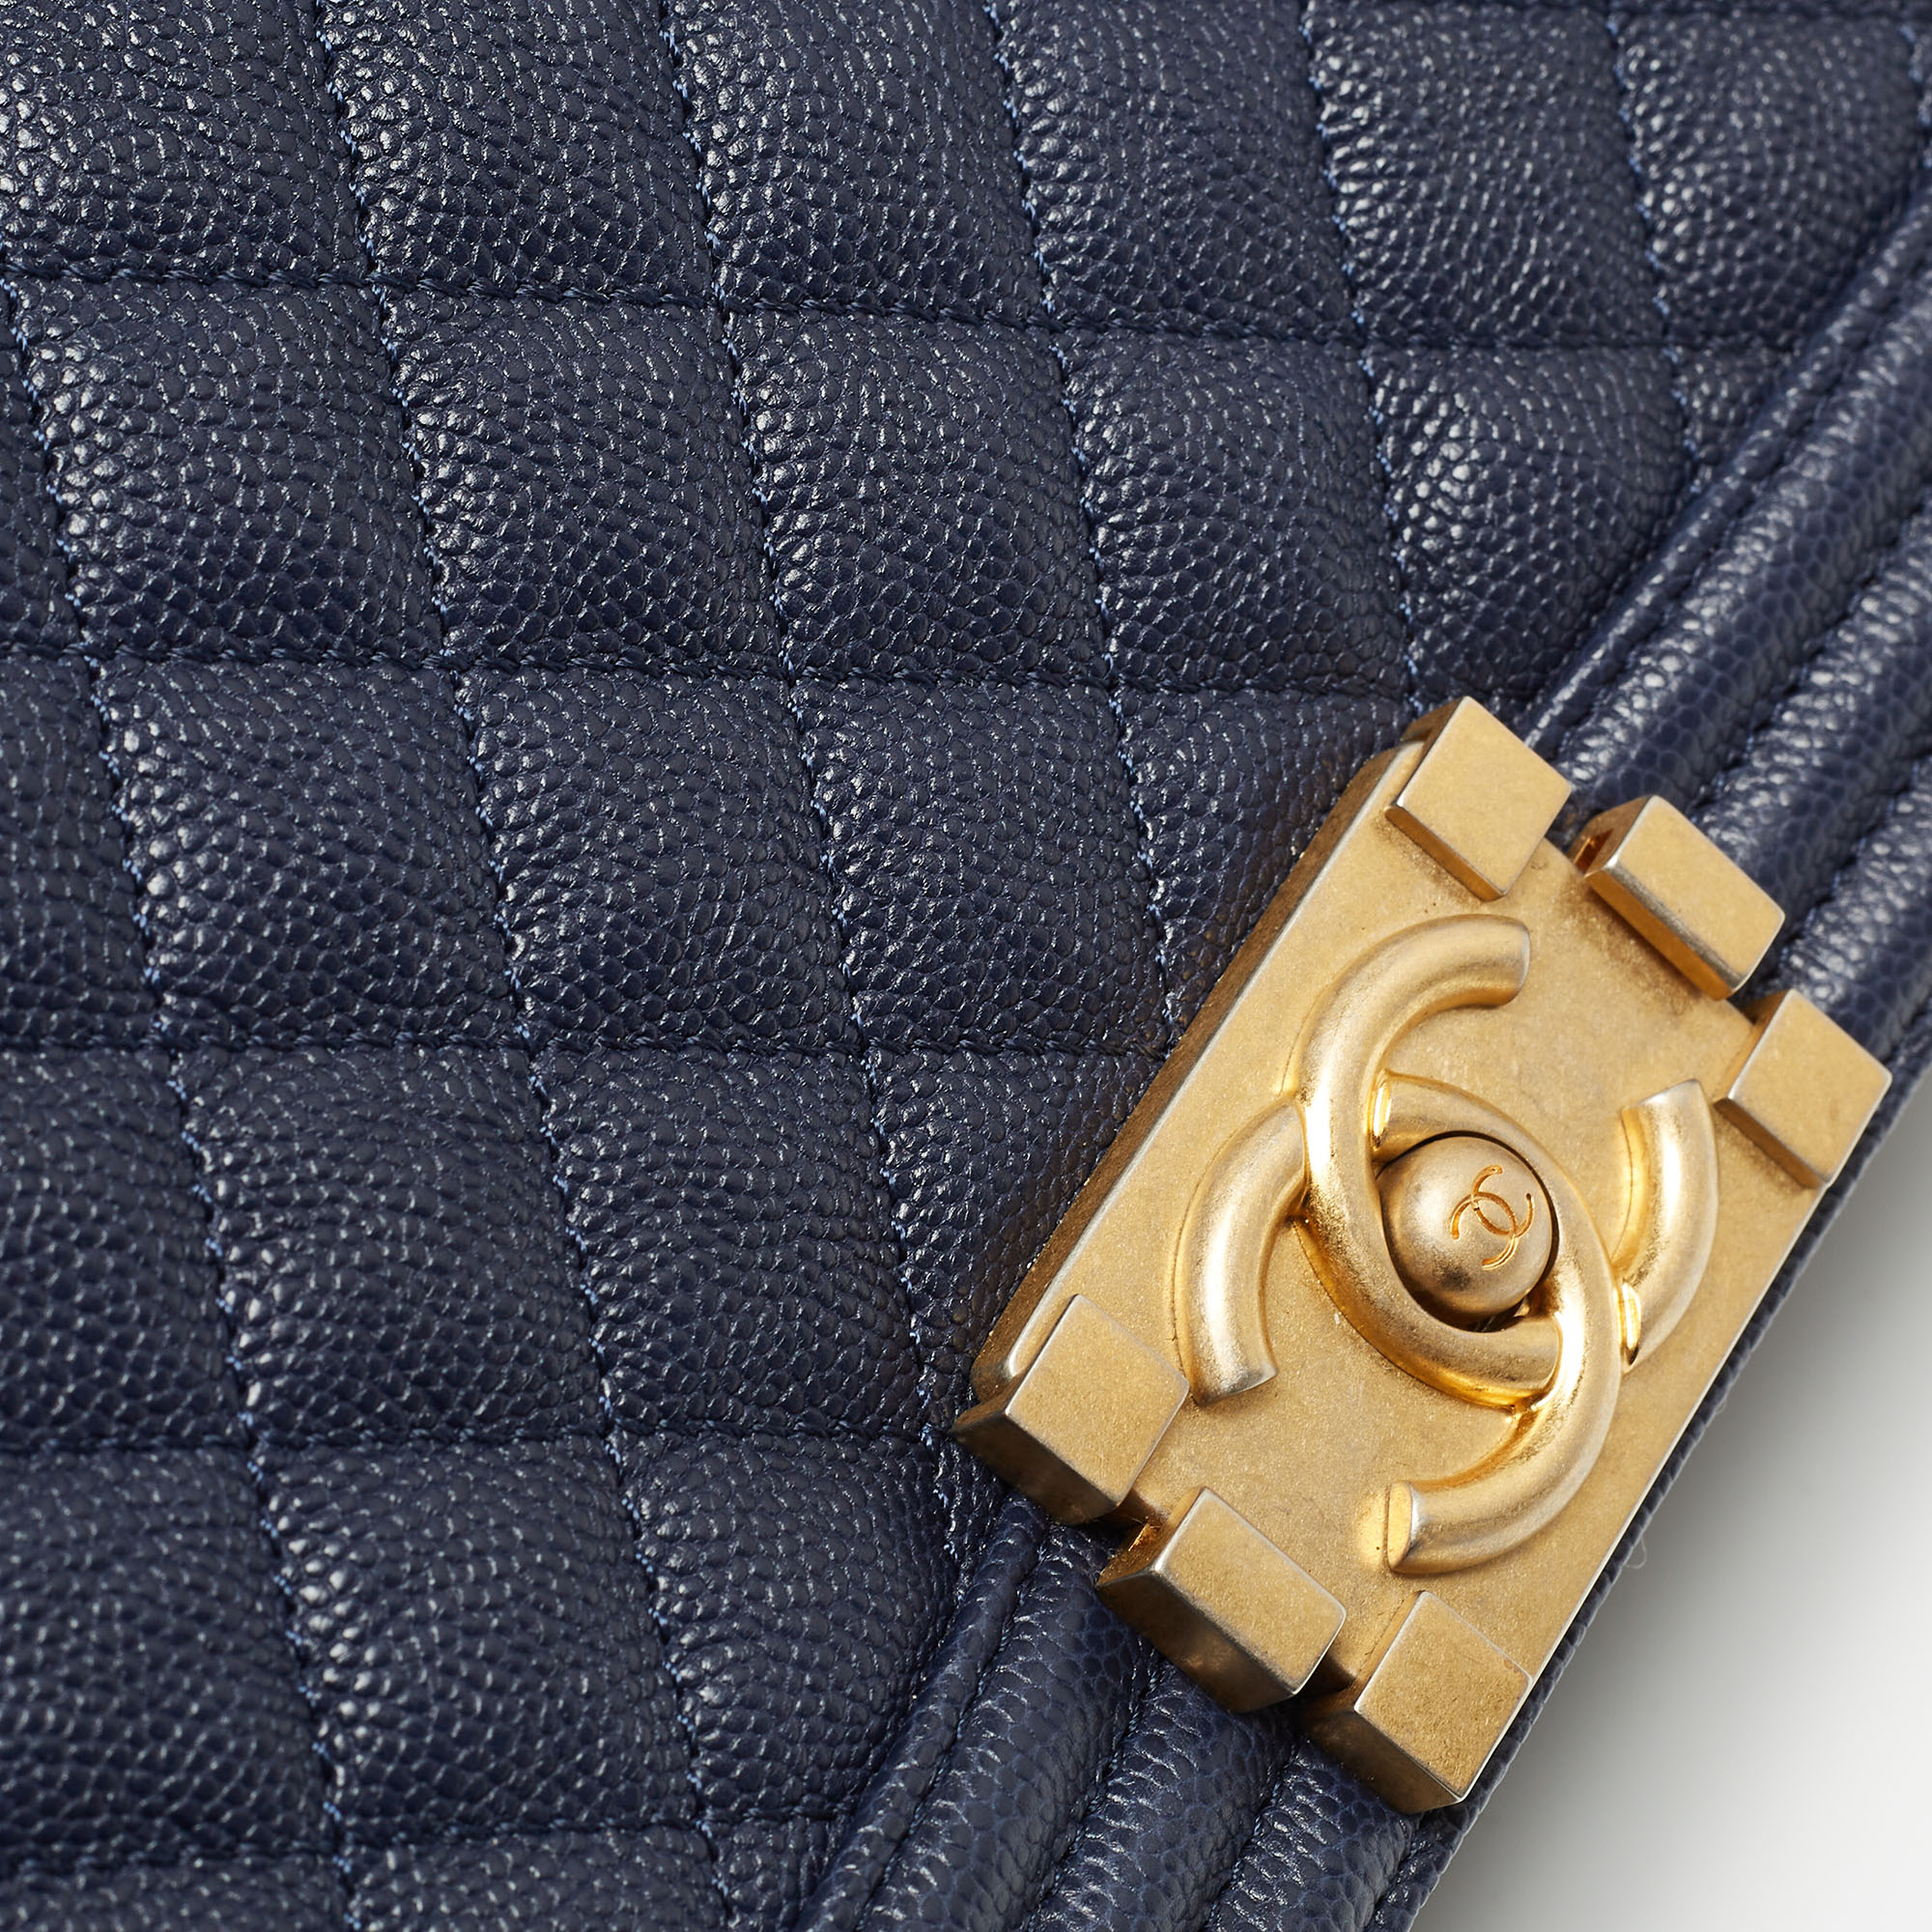 Chanel Navy Blue Quilted Caviar Leather Medium Boy Flap Bag